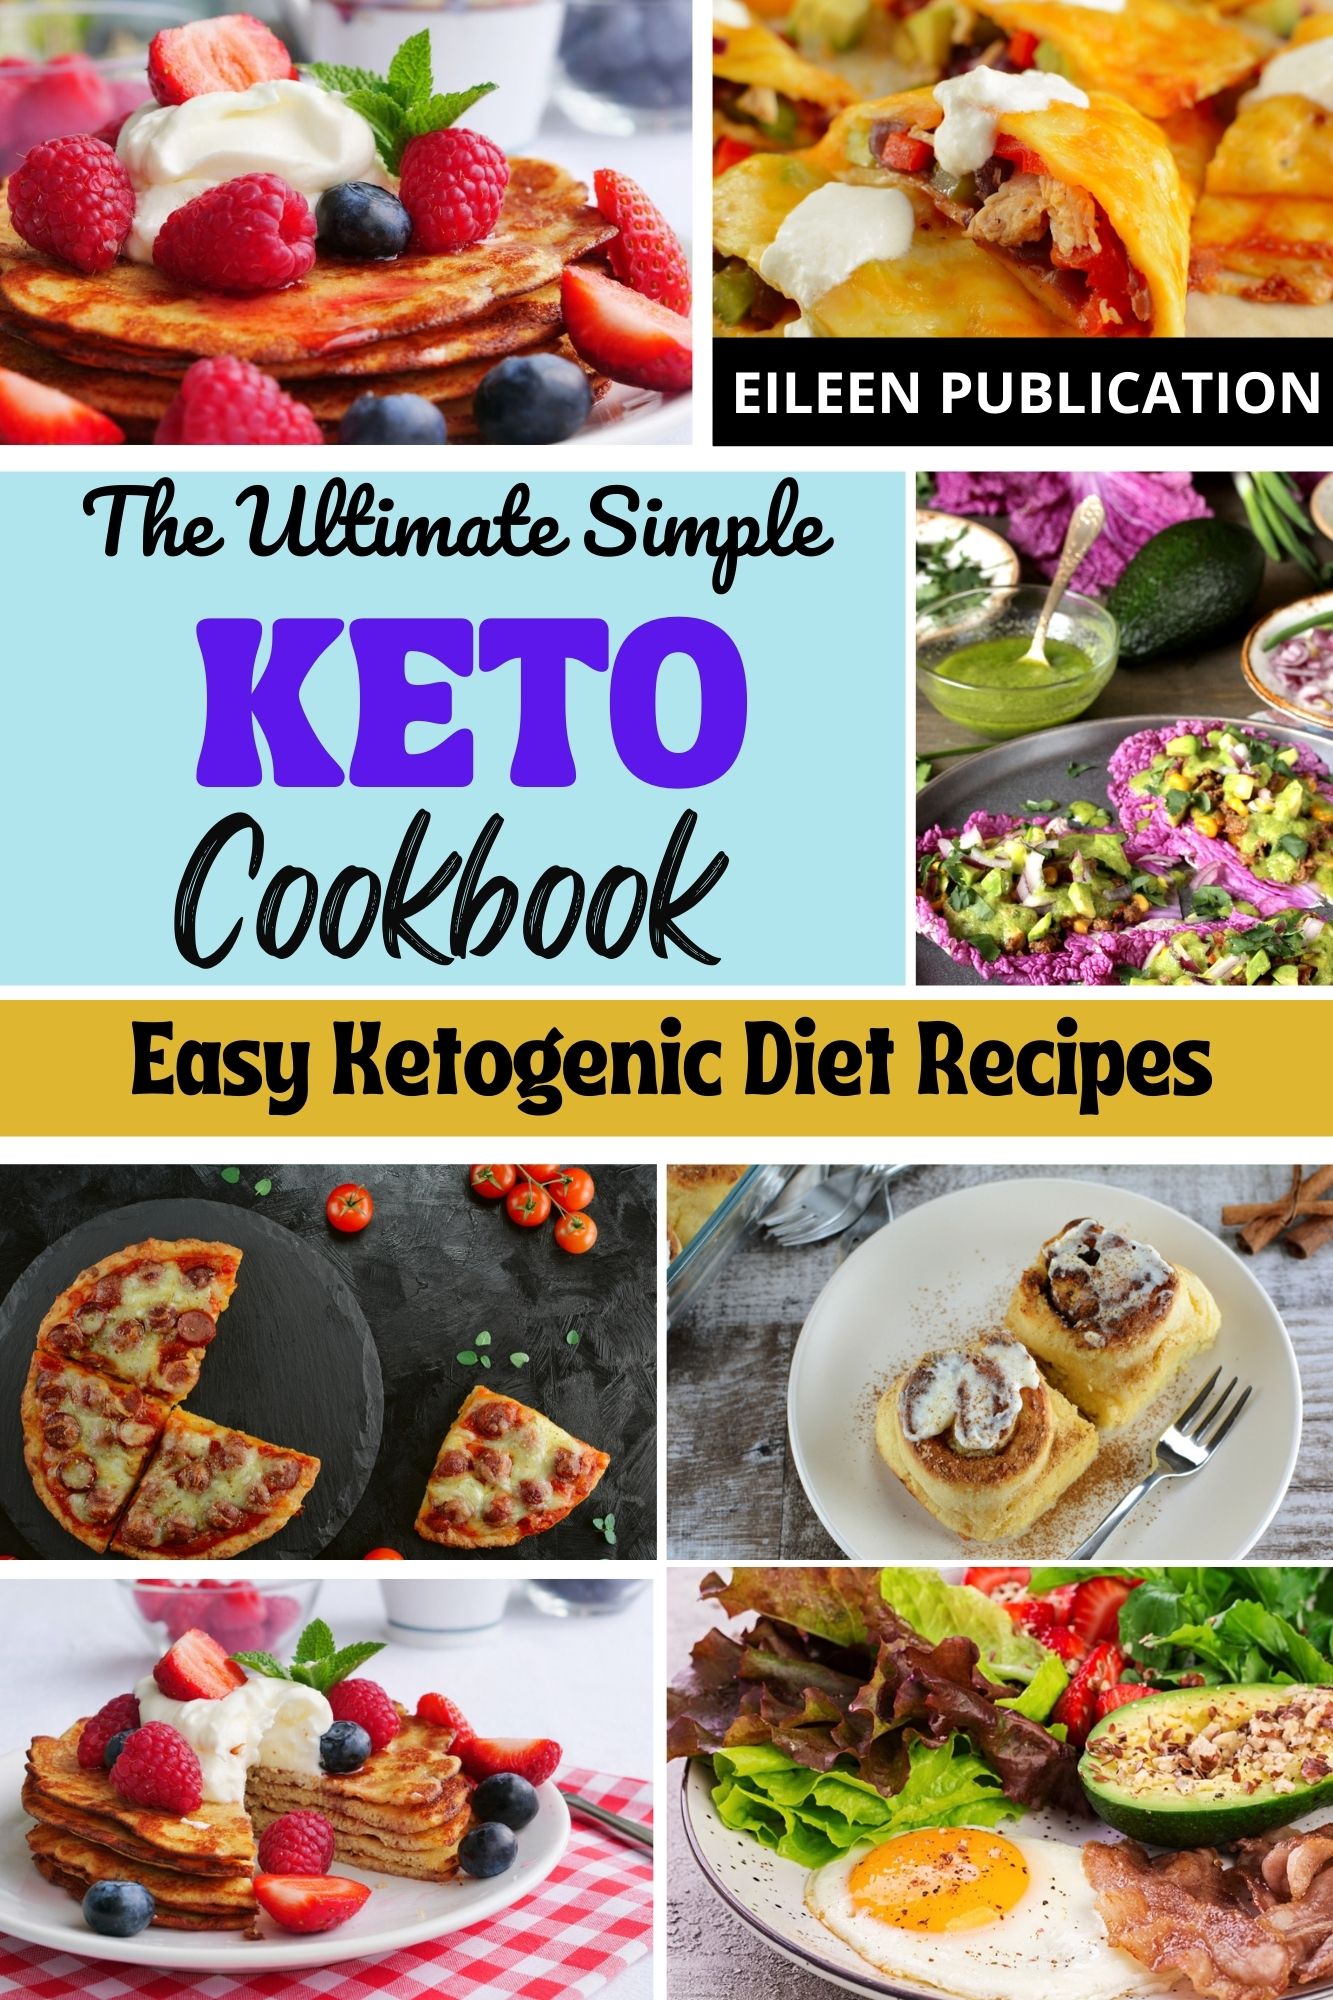 FREE: The Ultimate Simple Keto Cookbook by EILEEN PUBLICATION